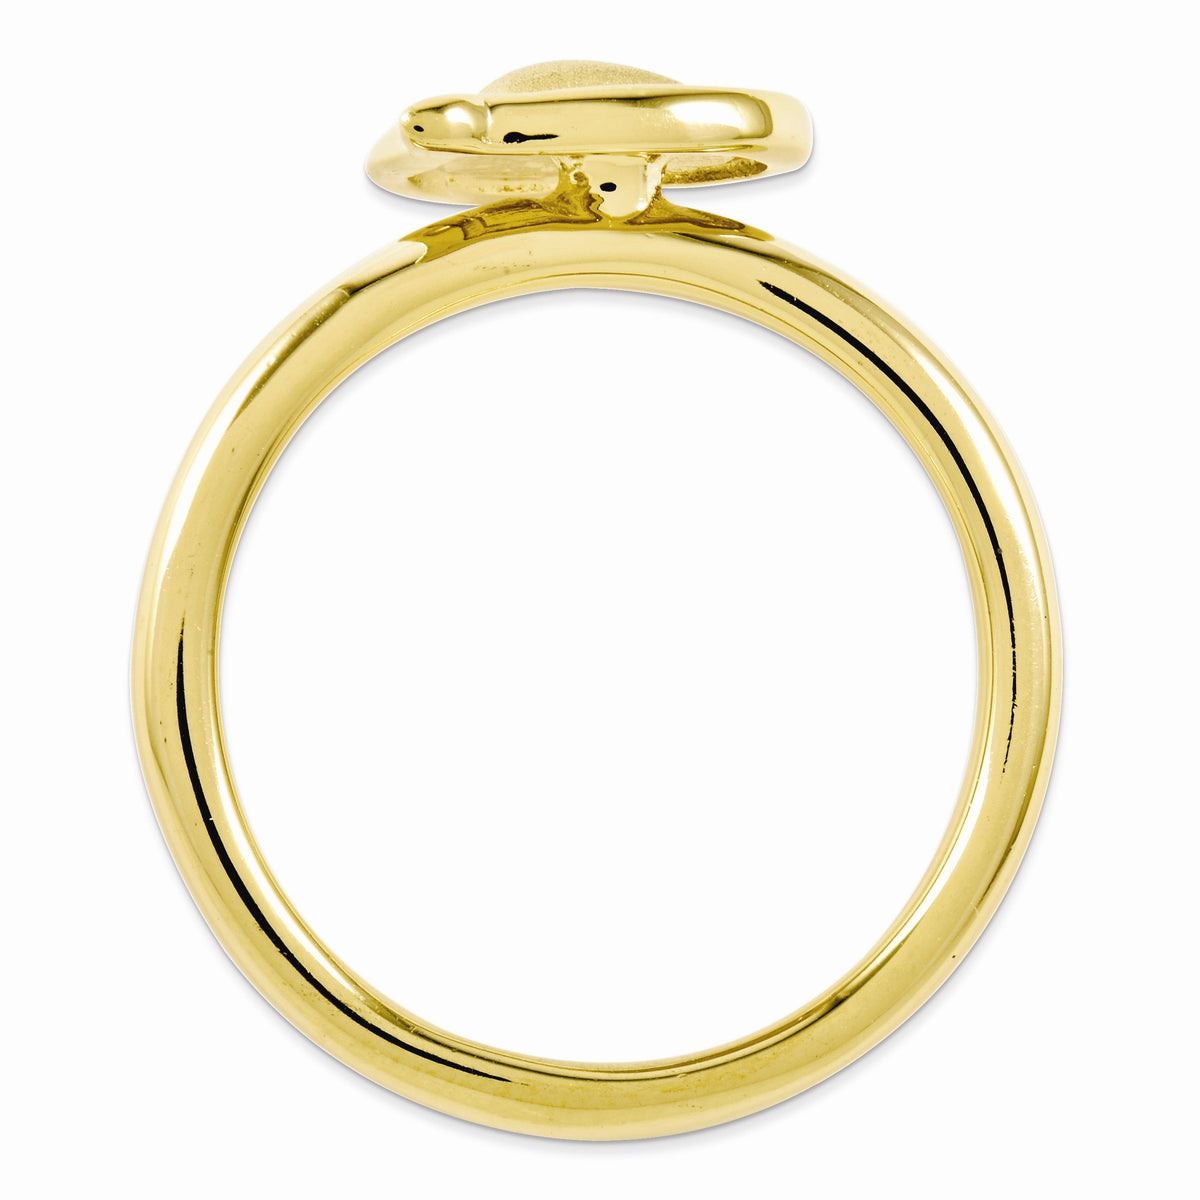 Alternate view of the Yellow Gold Tone Plated Sterling Silver Stackable 9mm Heart Ring by The Black Bow Jewelry Co.